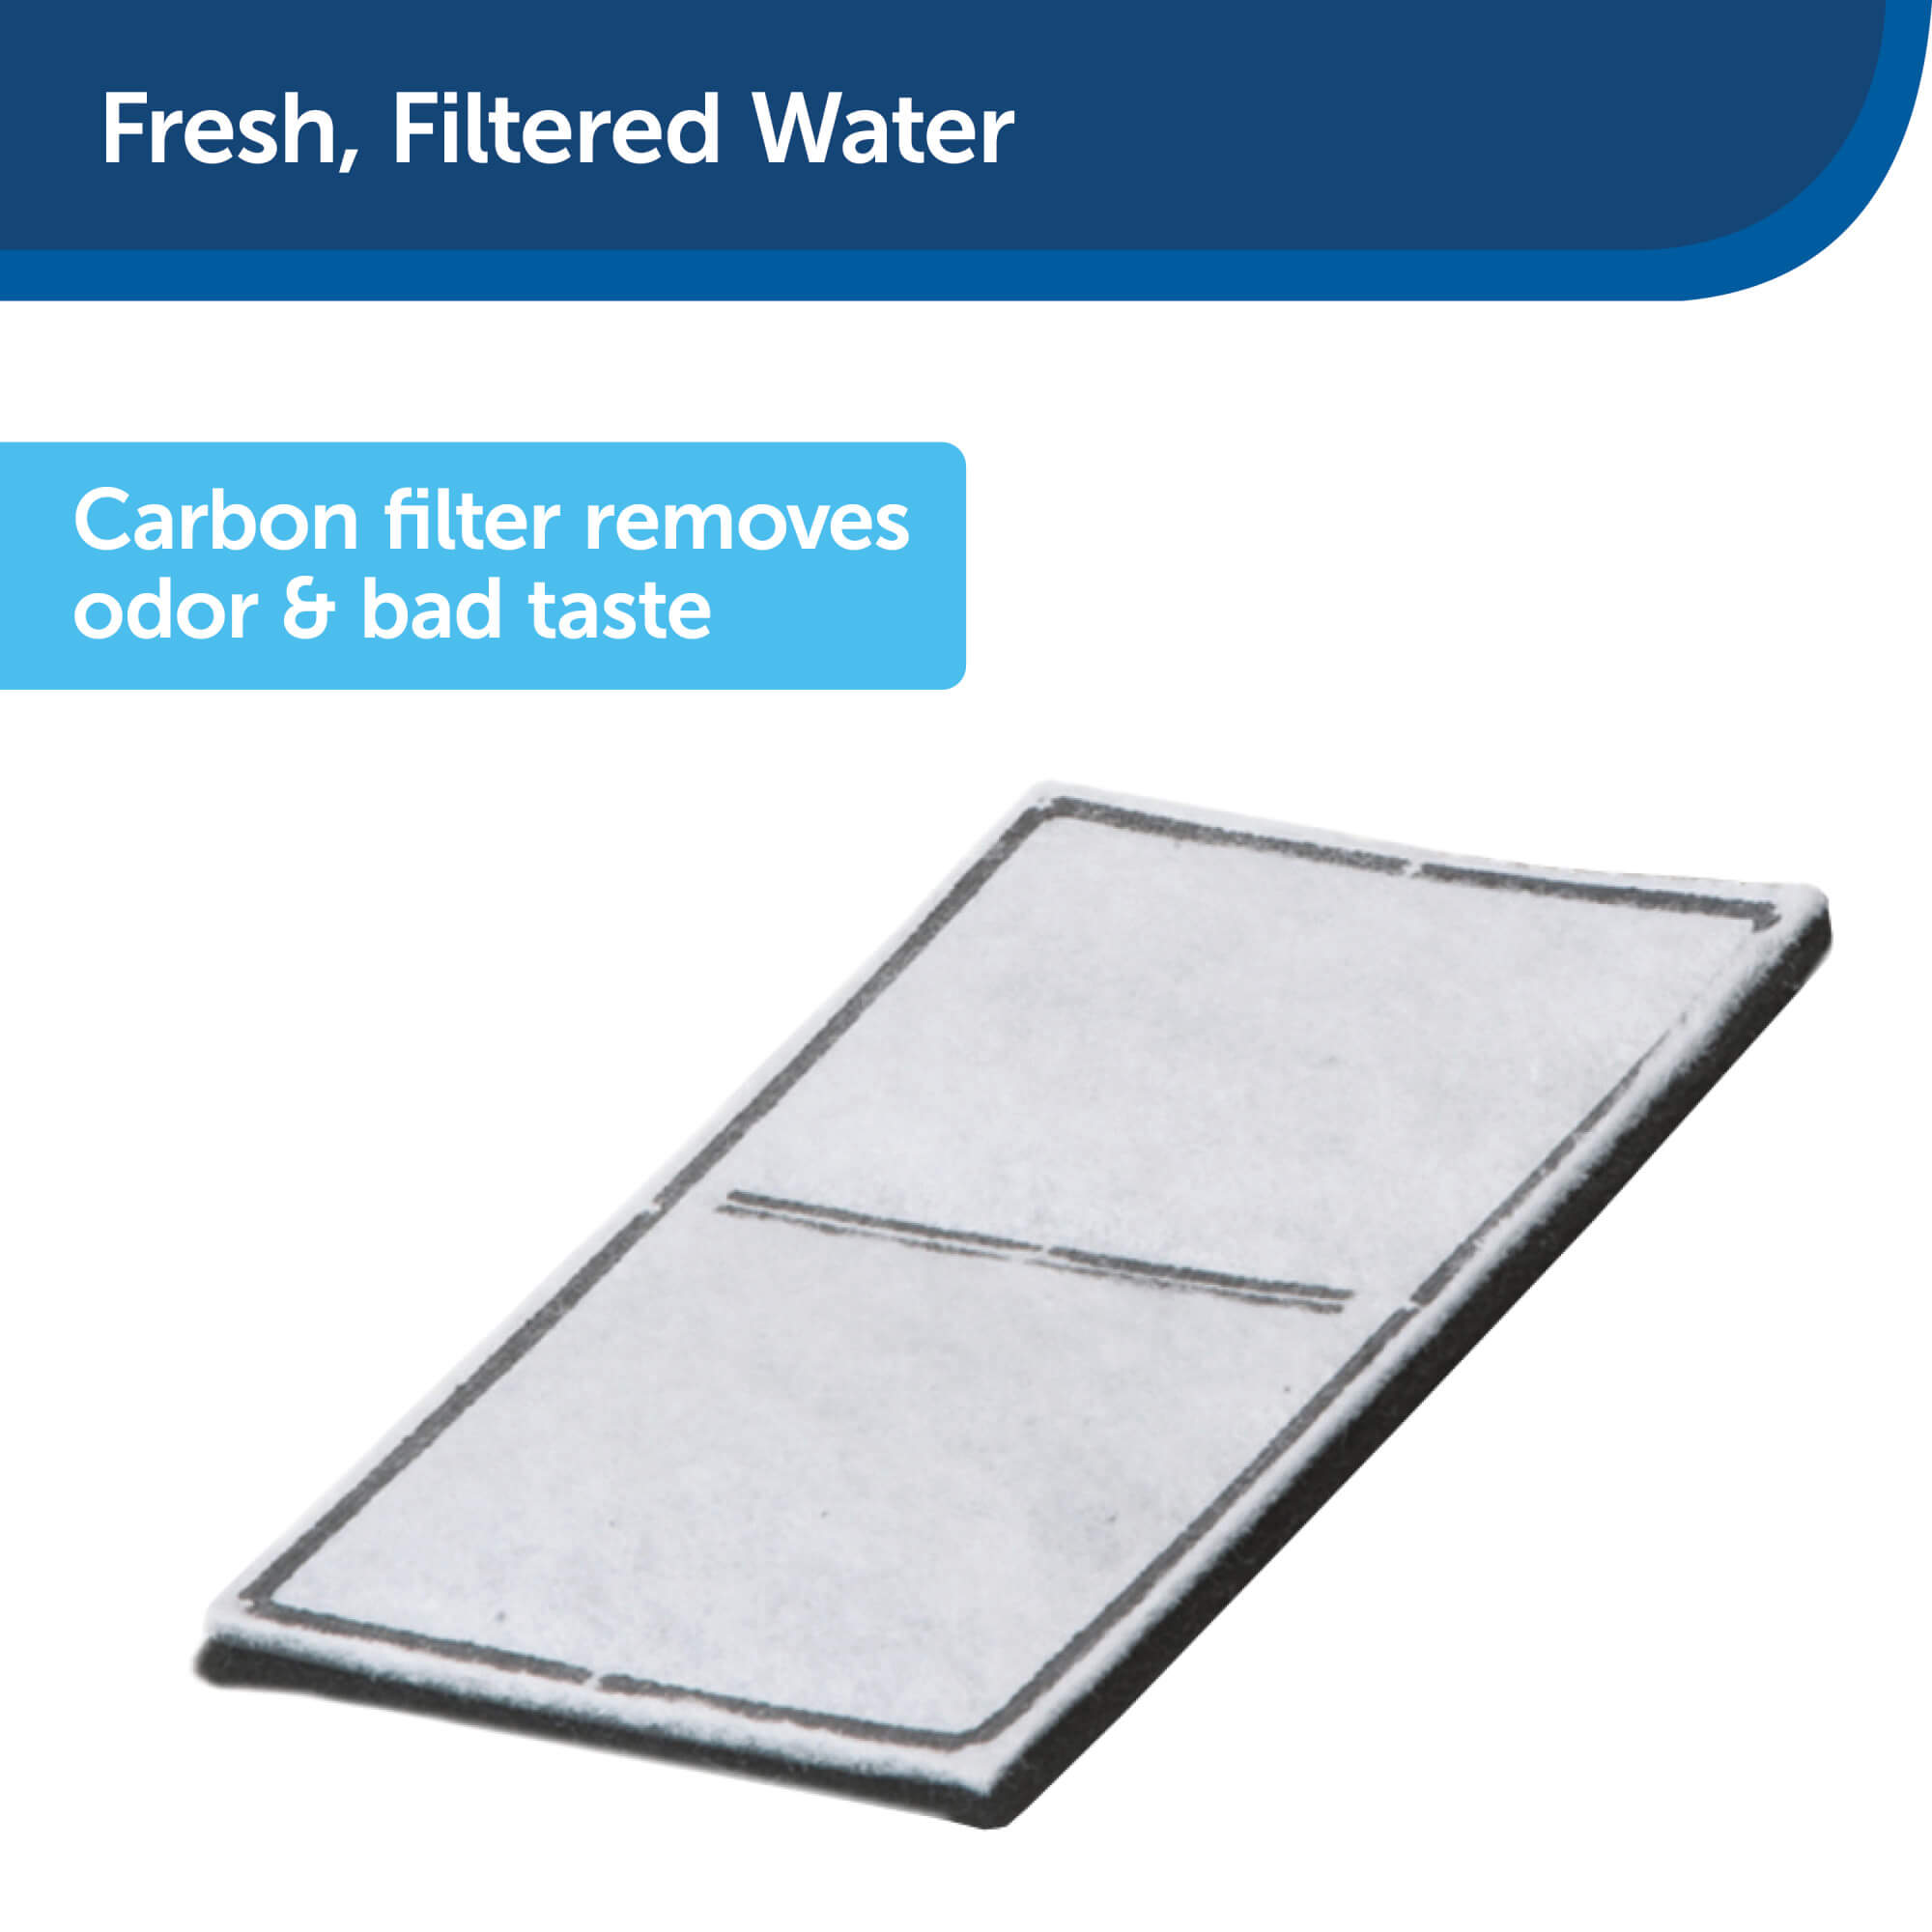 Fresh, filtered water